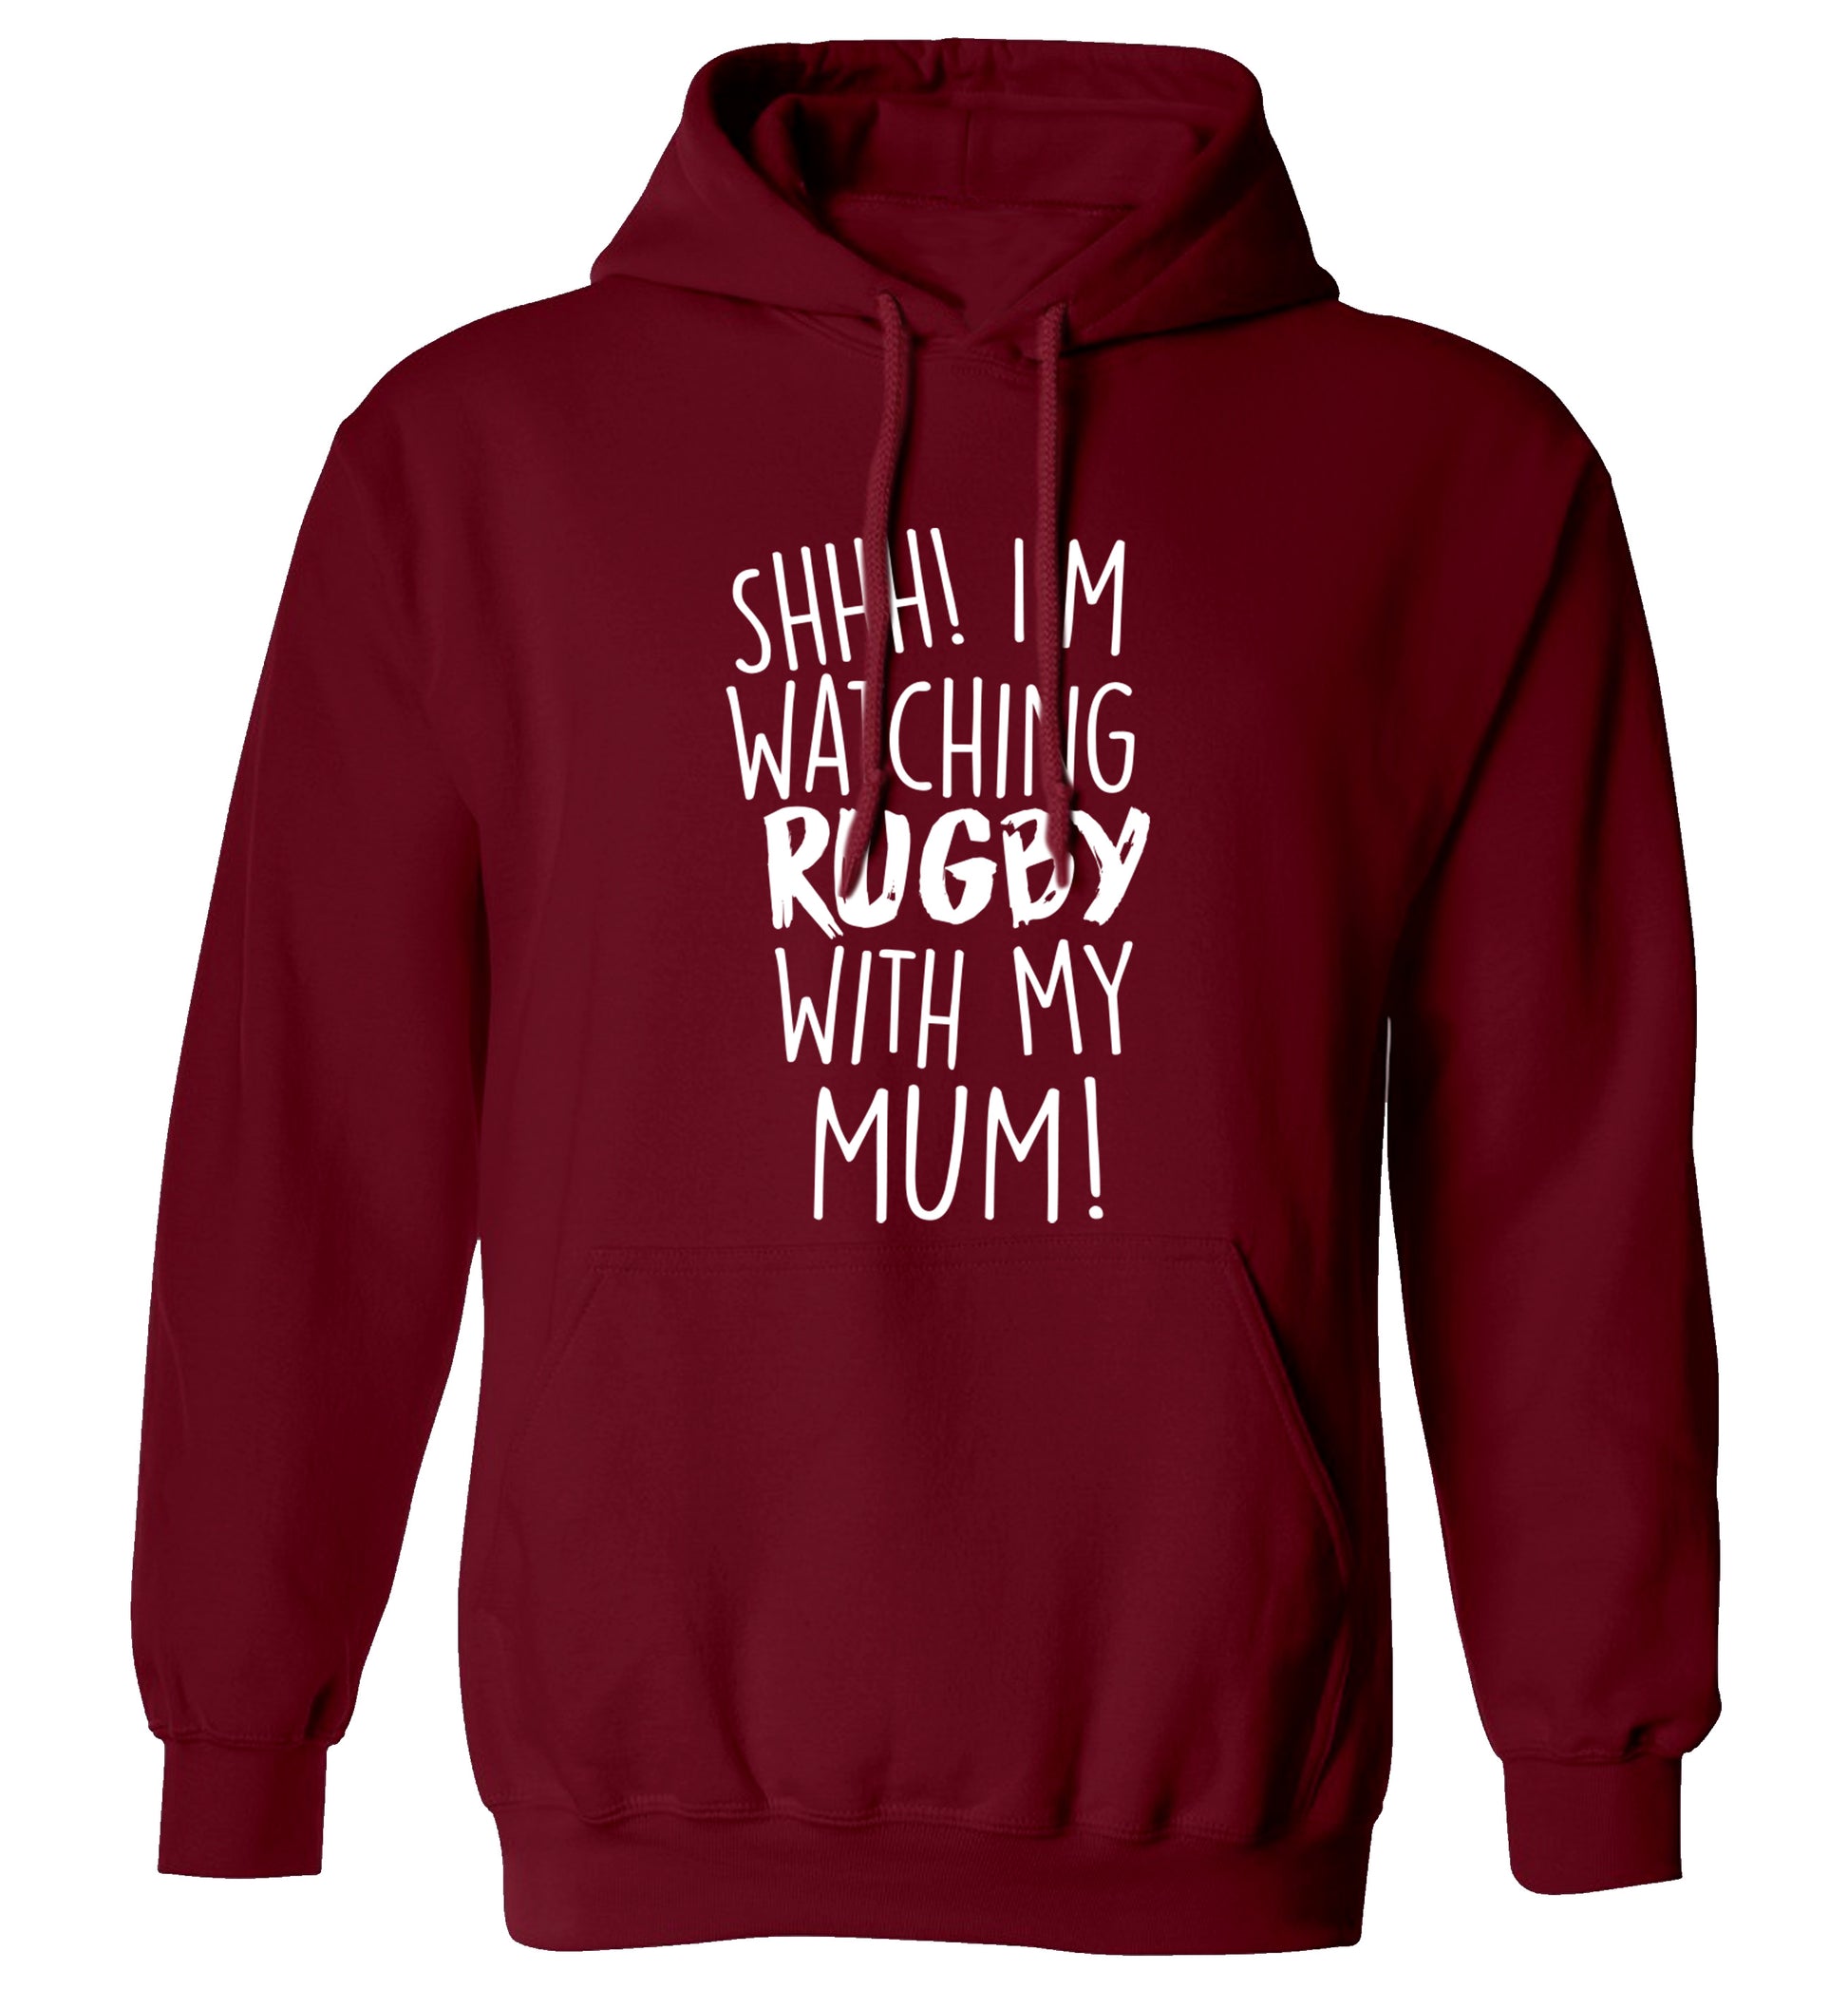 Shh... I'm watching rugby with my mum adults unisex maroon hoodie 2XL